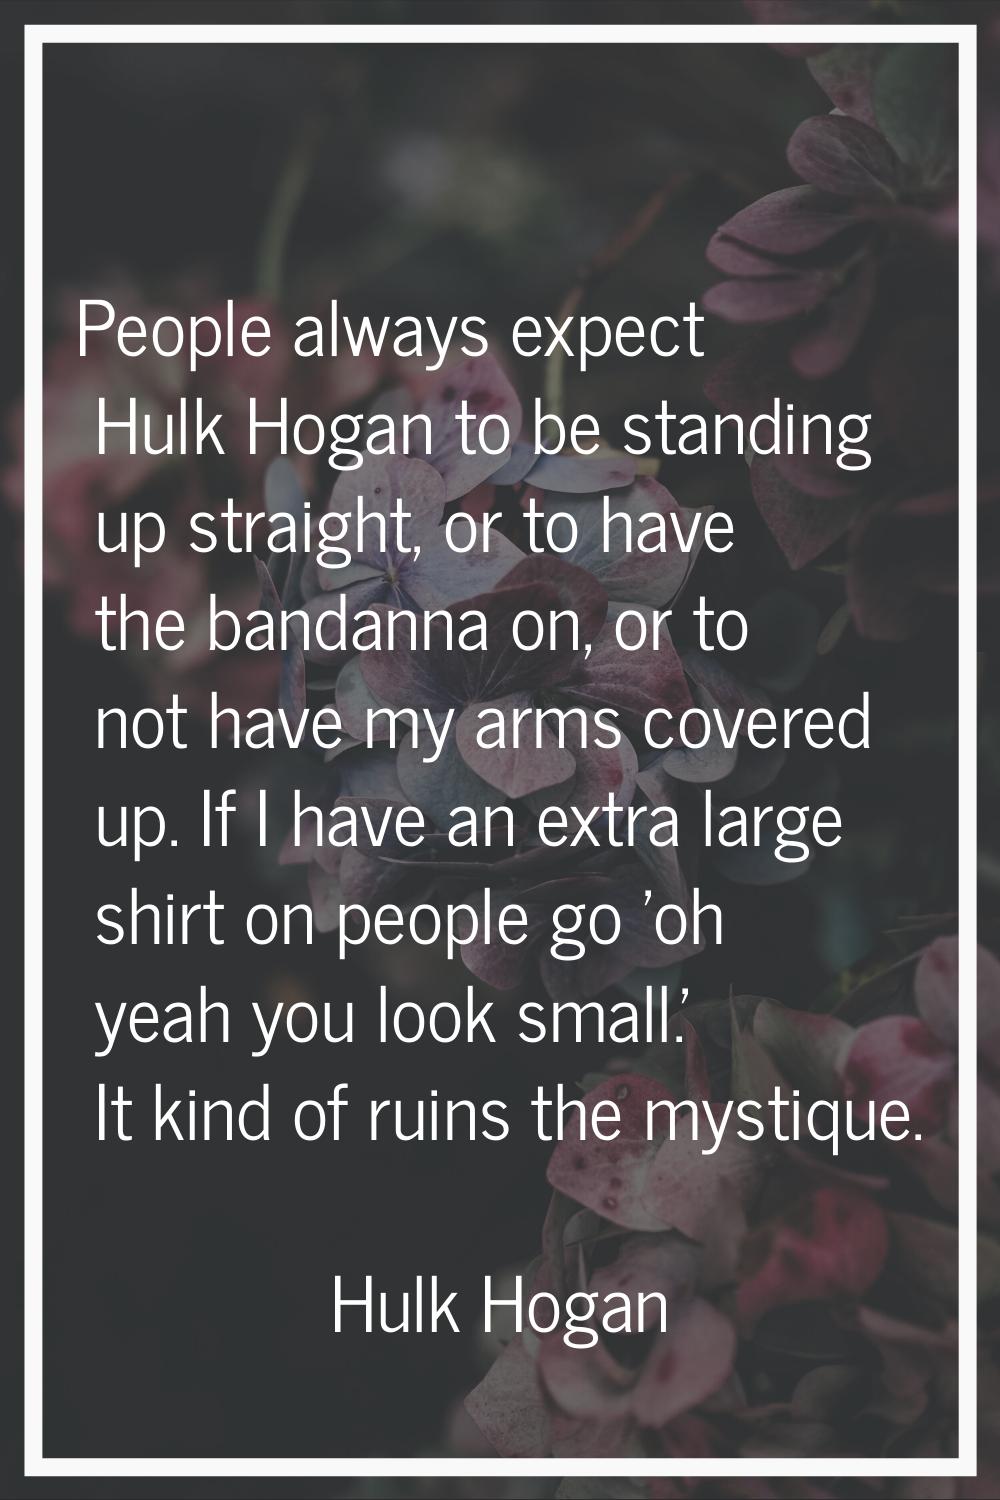 People always expect Hulk Hogan to be standing up straight, or to have the bandanna on, or to not h